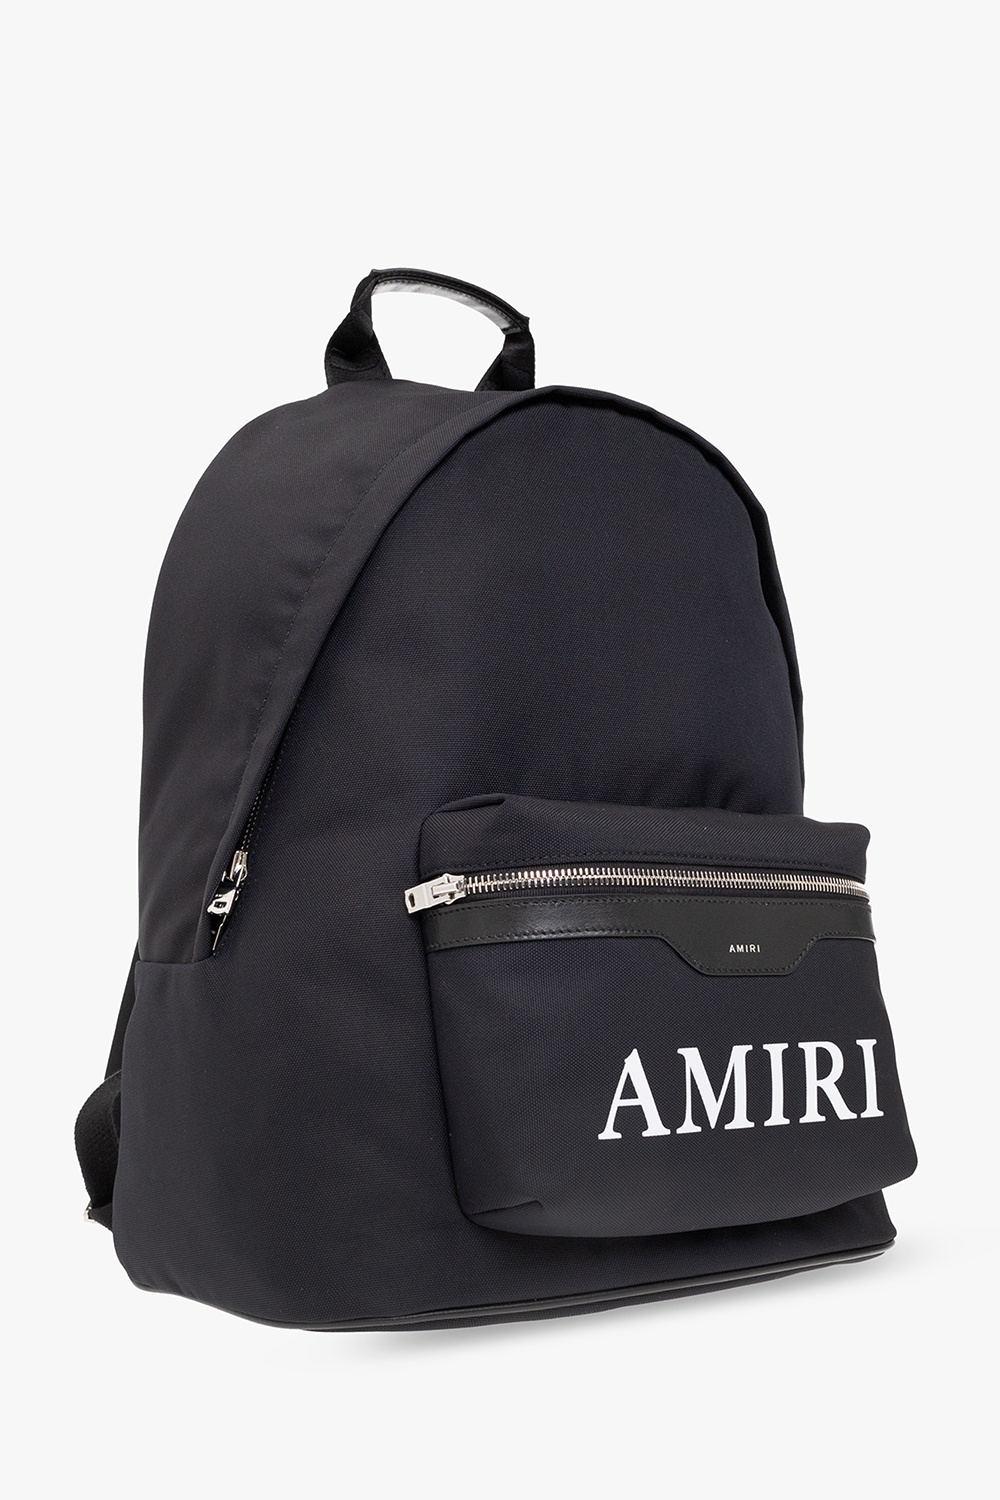 Black Backpack with logo Amiri - Level up your casual look wearing 